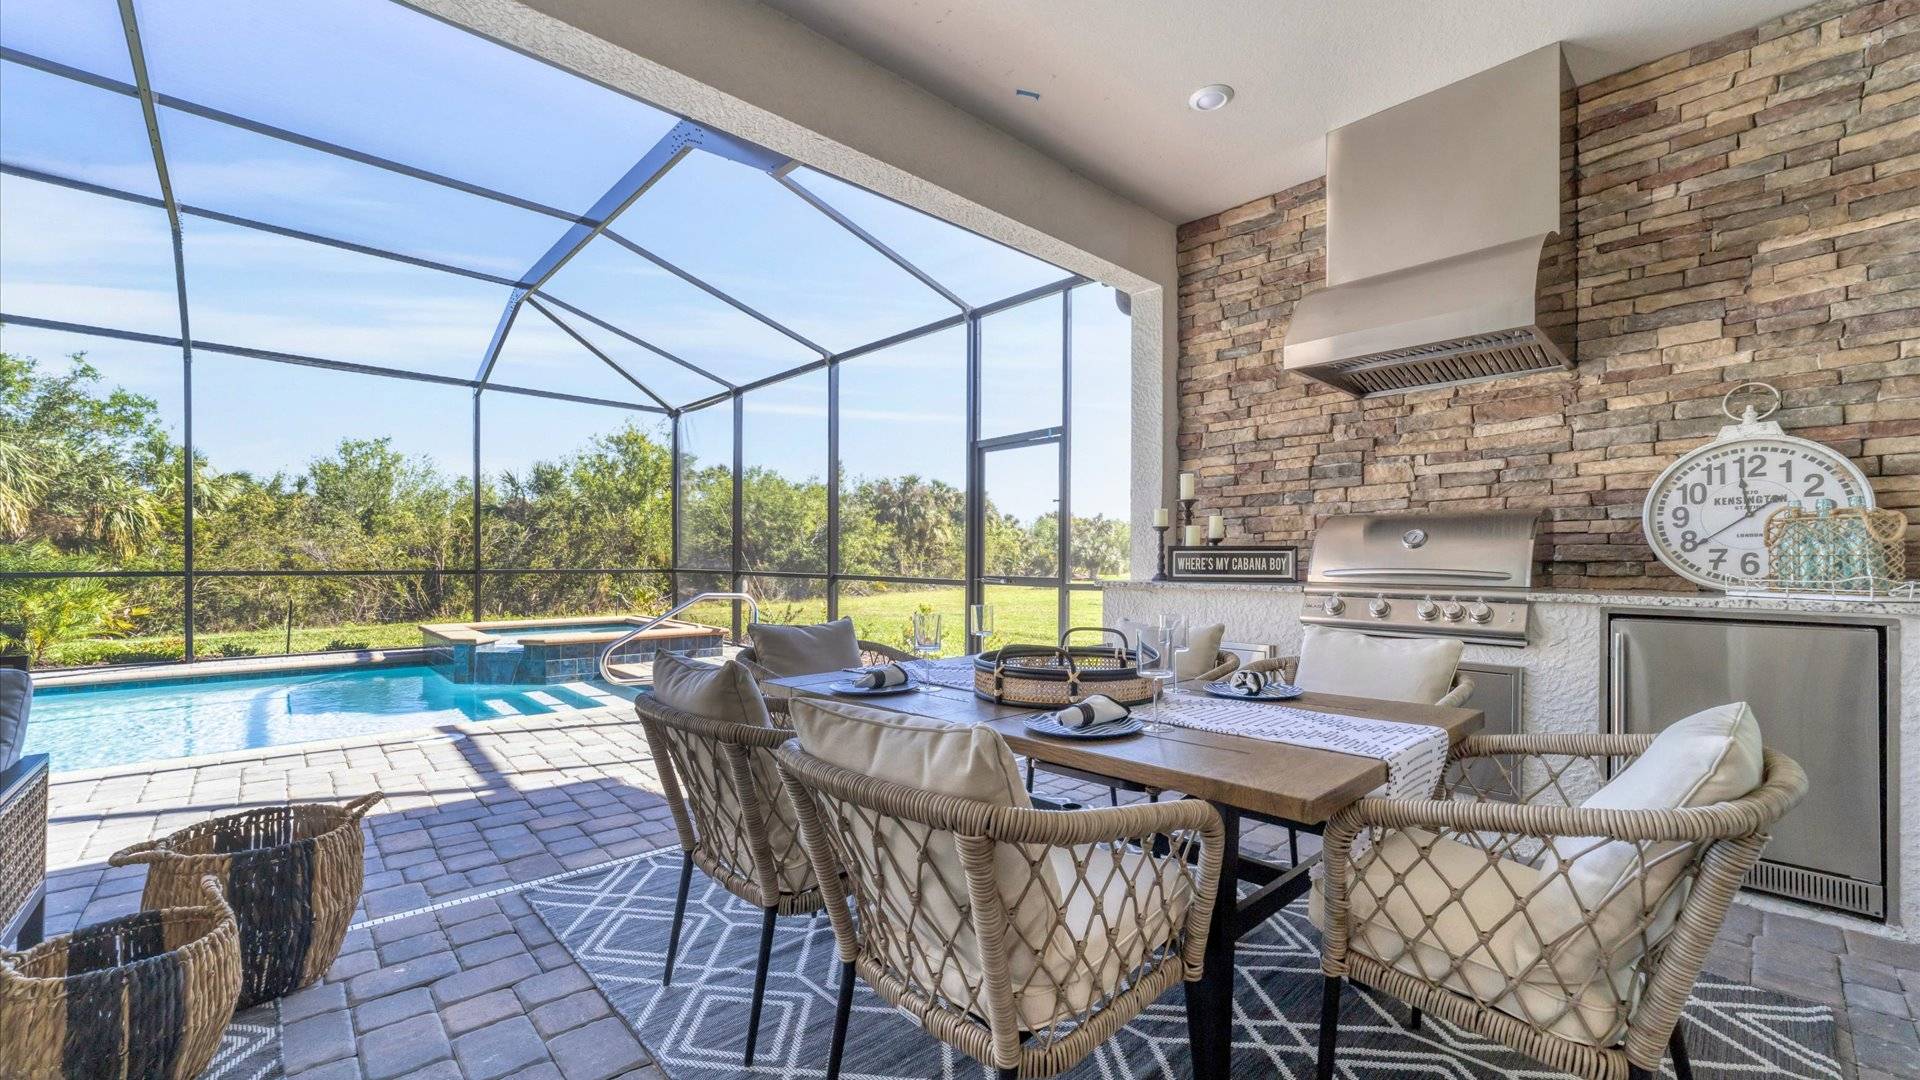 Gorgeous lanai with dining table, outdoor kitchen, pool and spa